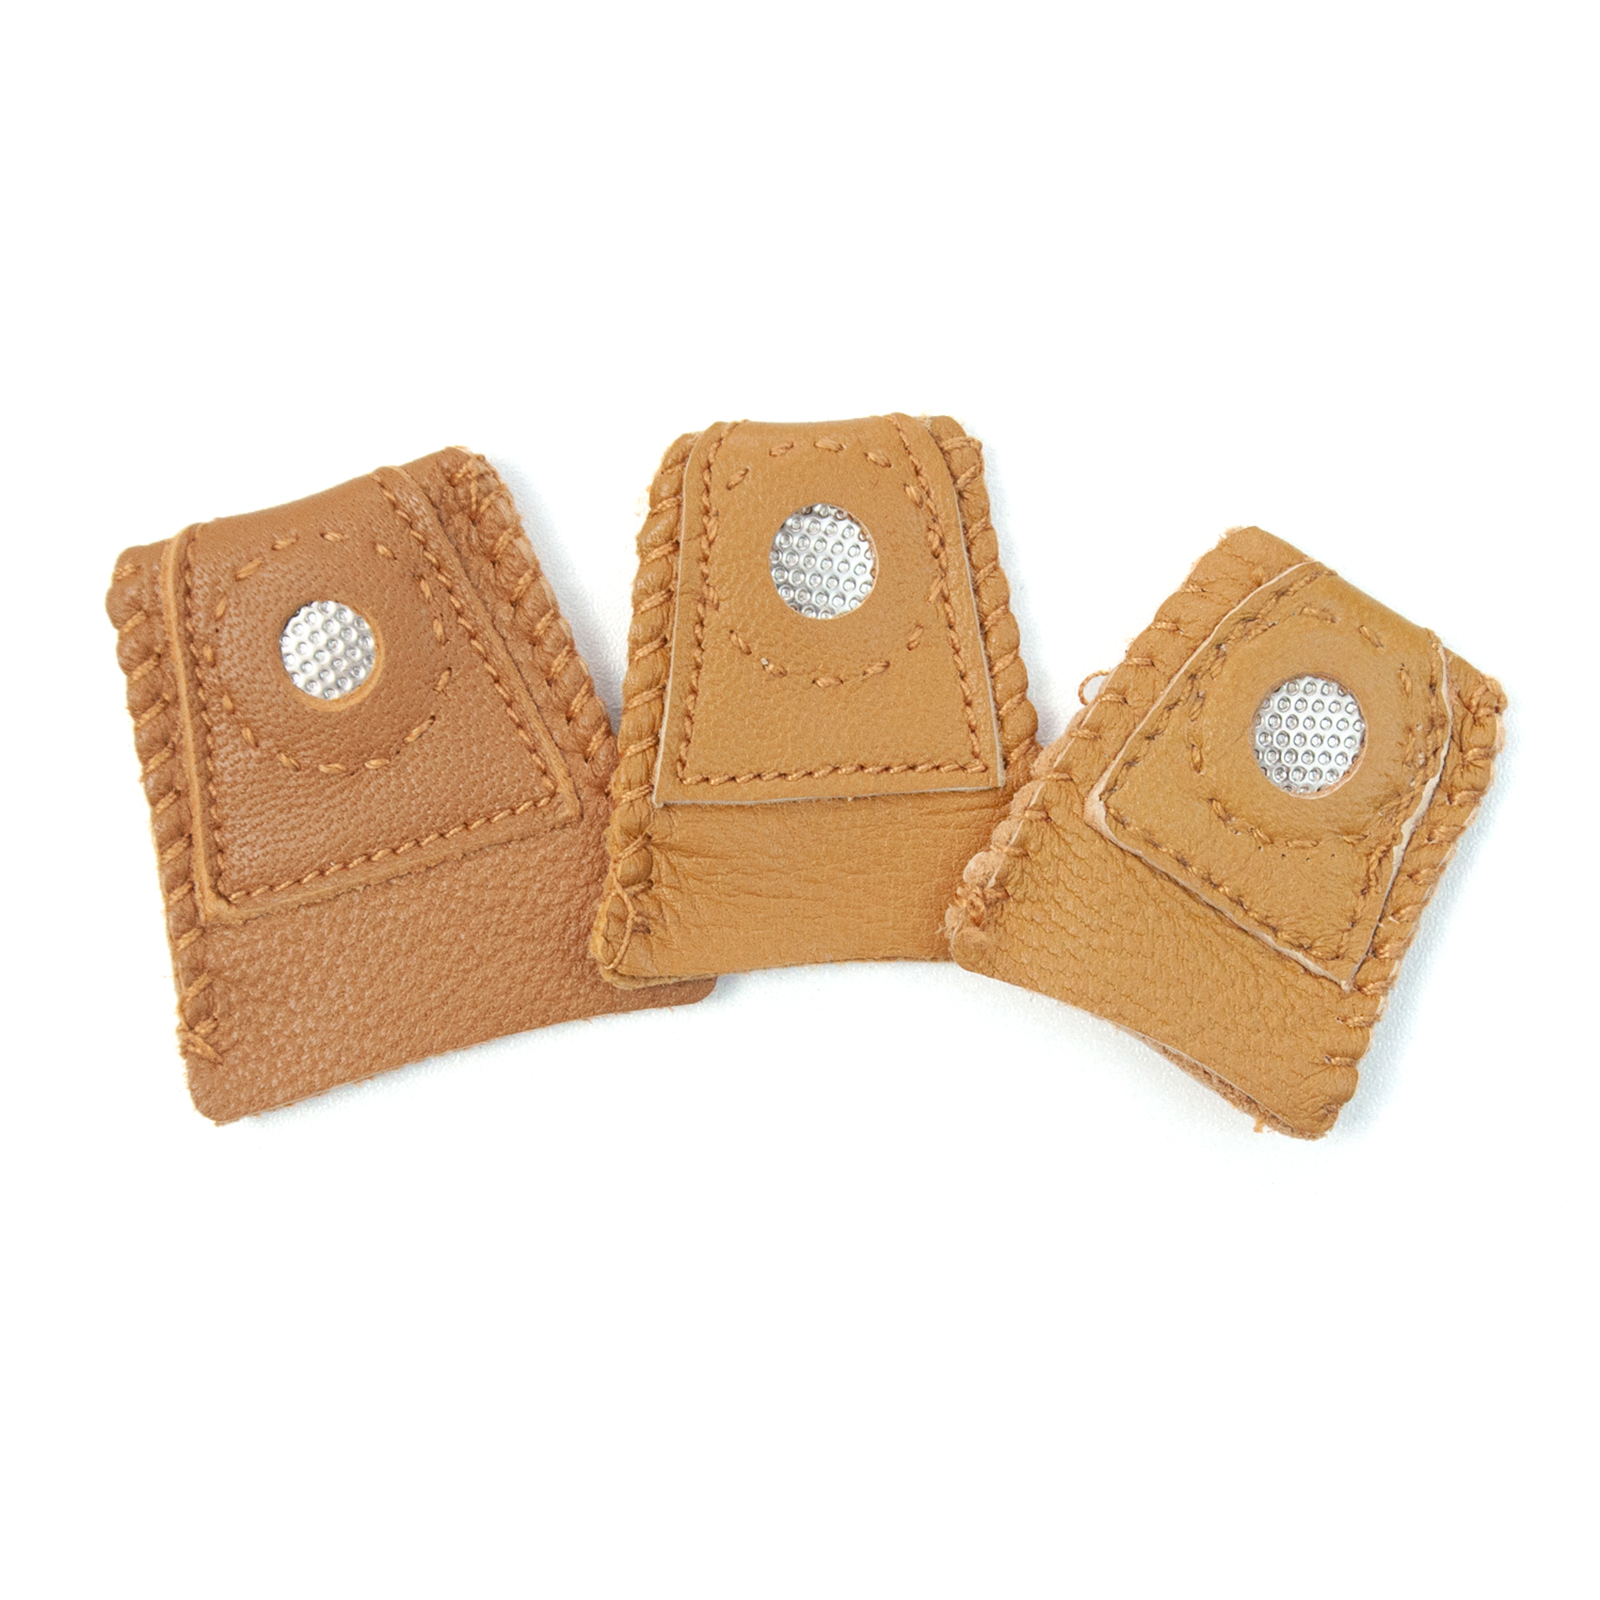 TINYSOME Sewing Thimble Leather Thimble Pads for Knitting Sewing Quilting  Pin Needles Craft Accessories Hand Sewing Tools 3 Sizes 